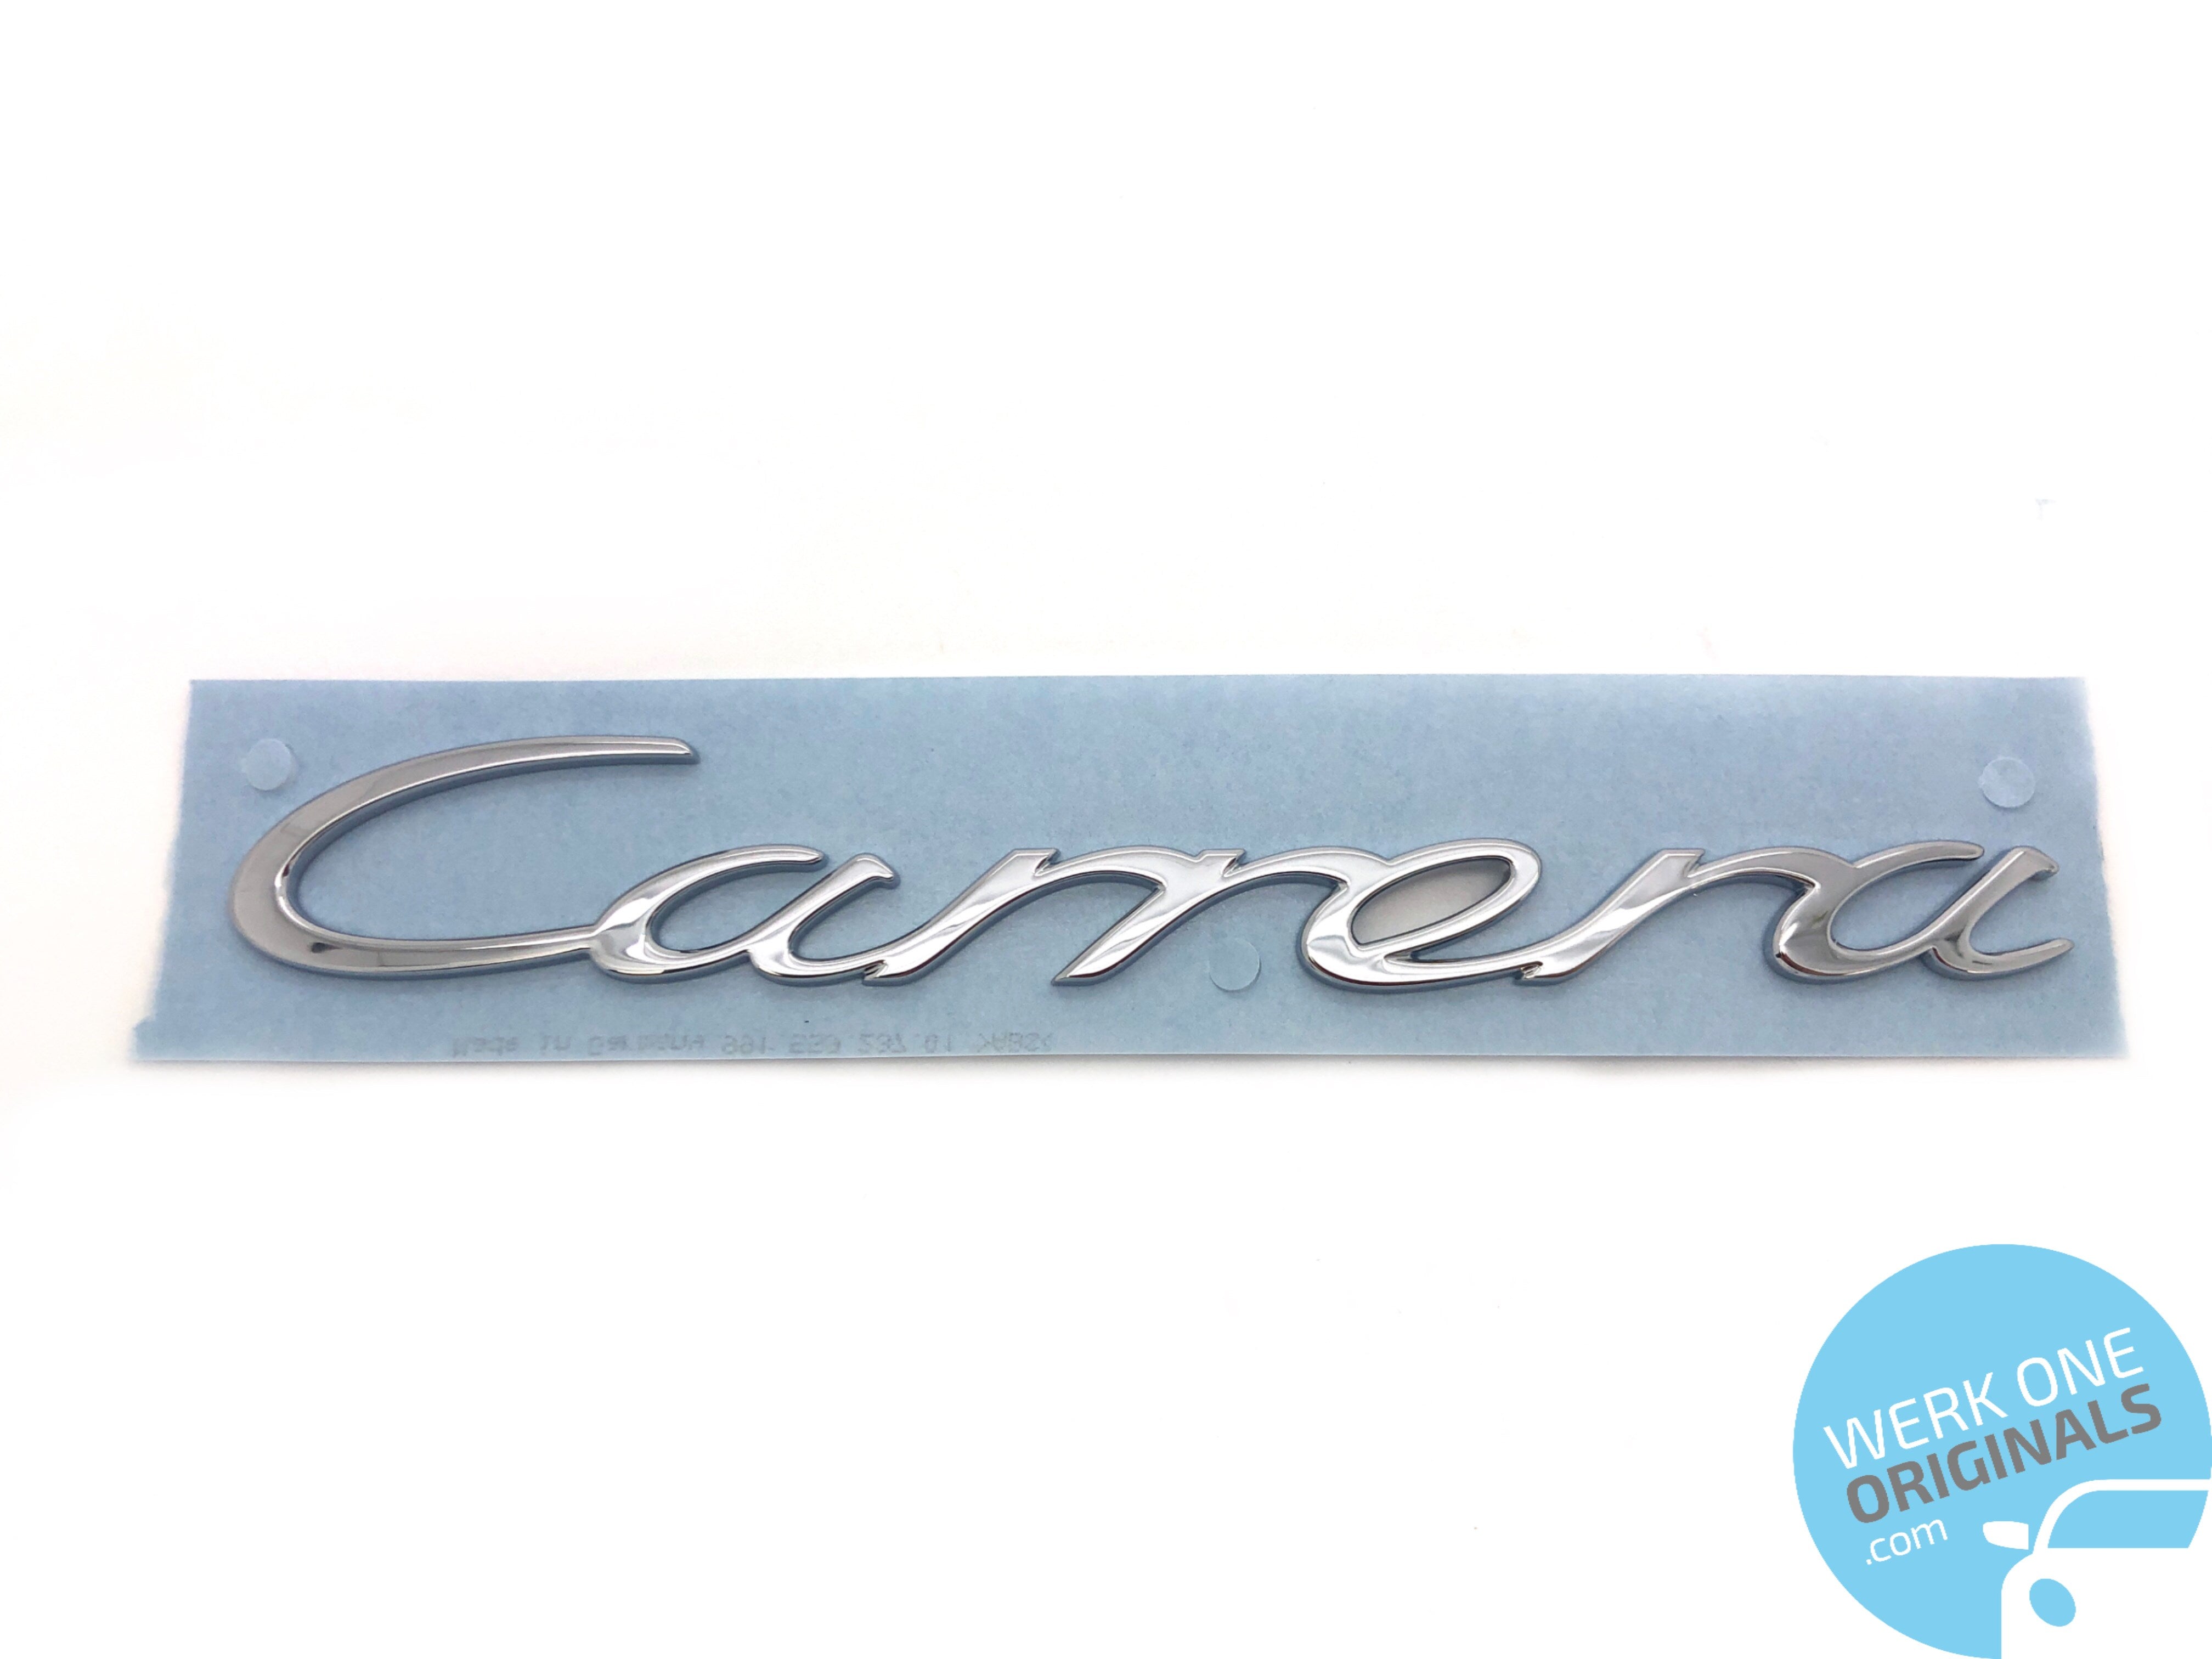 Porsche Official 'Carrera' Rear Badge Decal in Chrome Silver for 911 Type 991 Carrera Models!